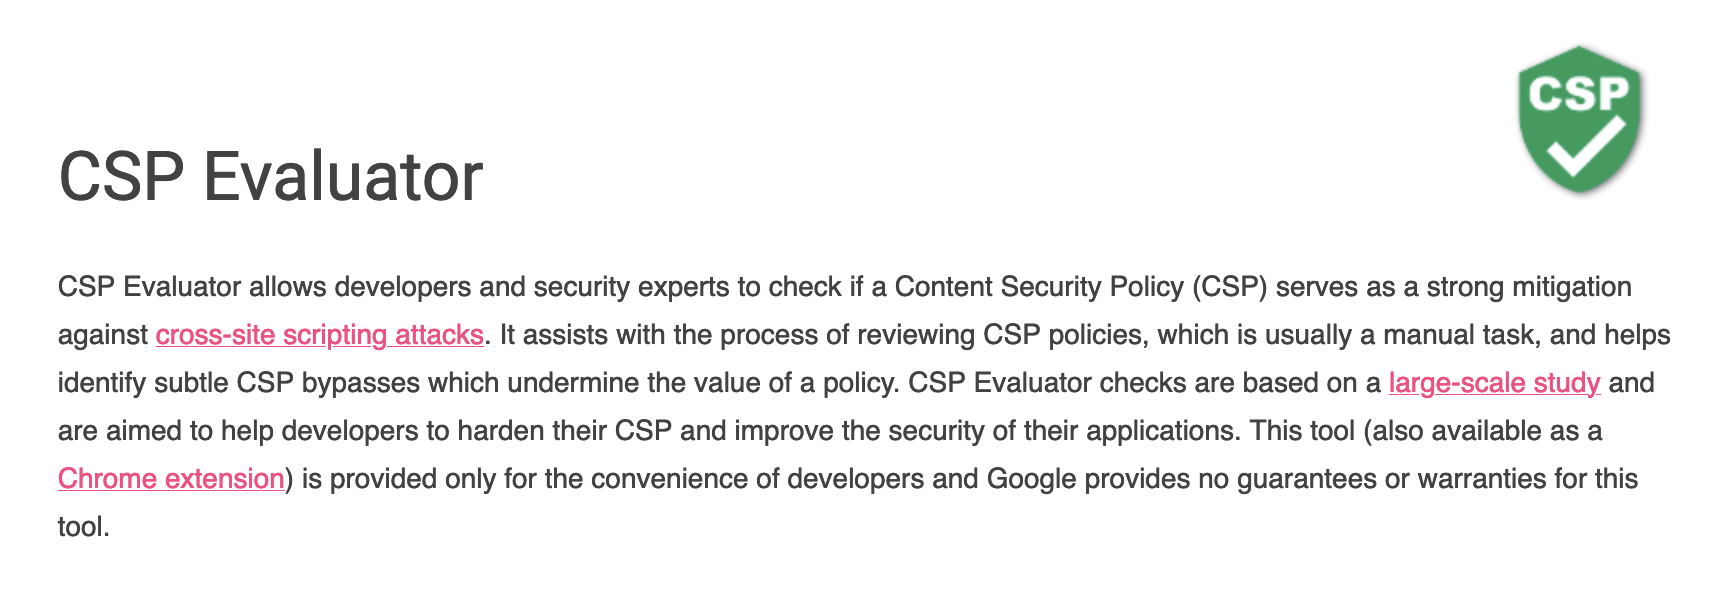 CSP Evaluator allows developers and security experts to check if a Content Security Policy (CSP) serves as a strong mitigation against cross-site scripting attacks. It assists with the process of reviewing CSP policies, which is usually a manual task, and helps identify subtle CSP bypasses which undermine the value of a policy. CSP Evaluator checks are based on a large-scale study and are aimed to help developers to harden their CSP and improve the security of their applications. This tool (also available as a Chrome extension) is provided only for the convenience of developers and Google provides no guarantees or warranties for this tool. 